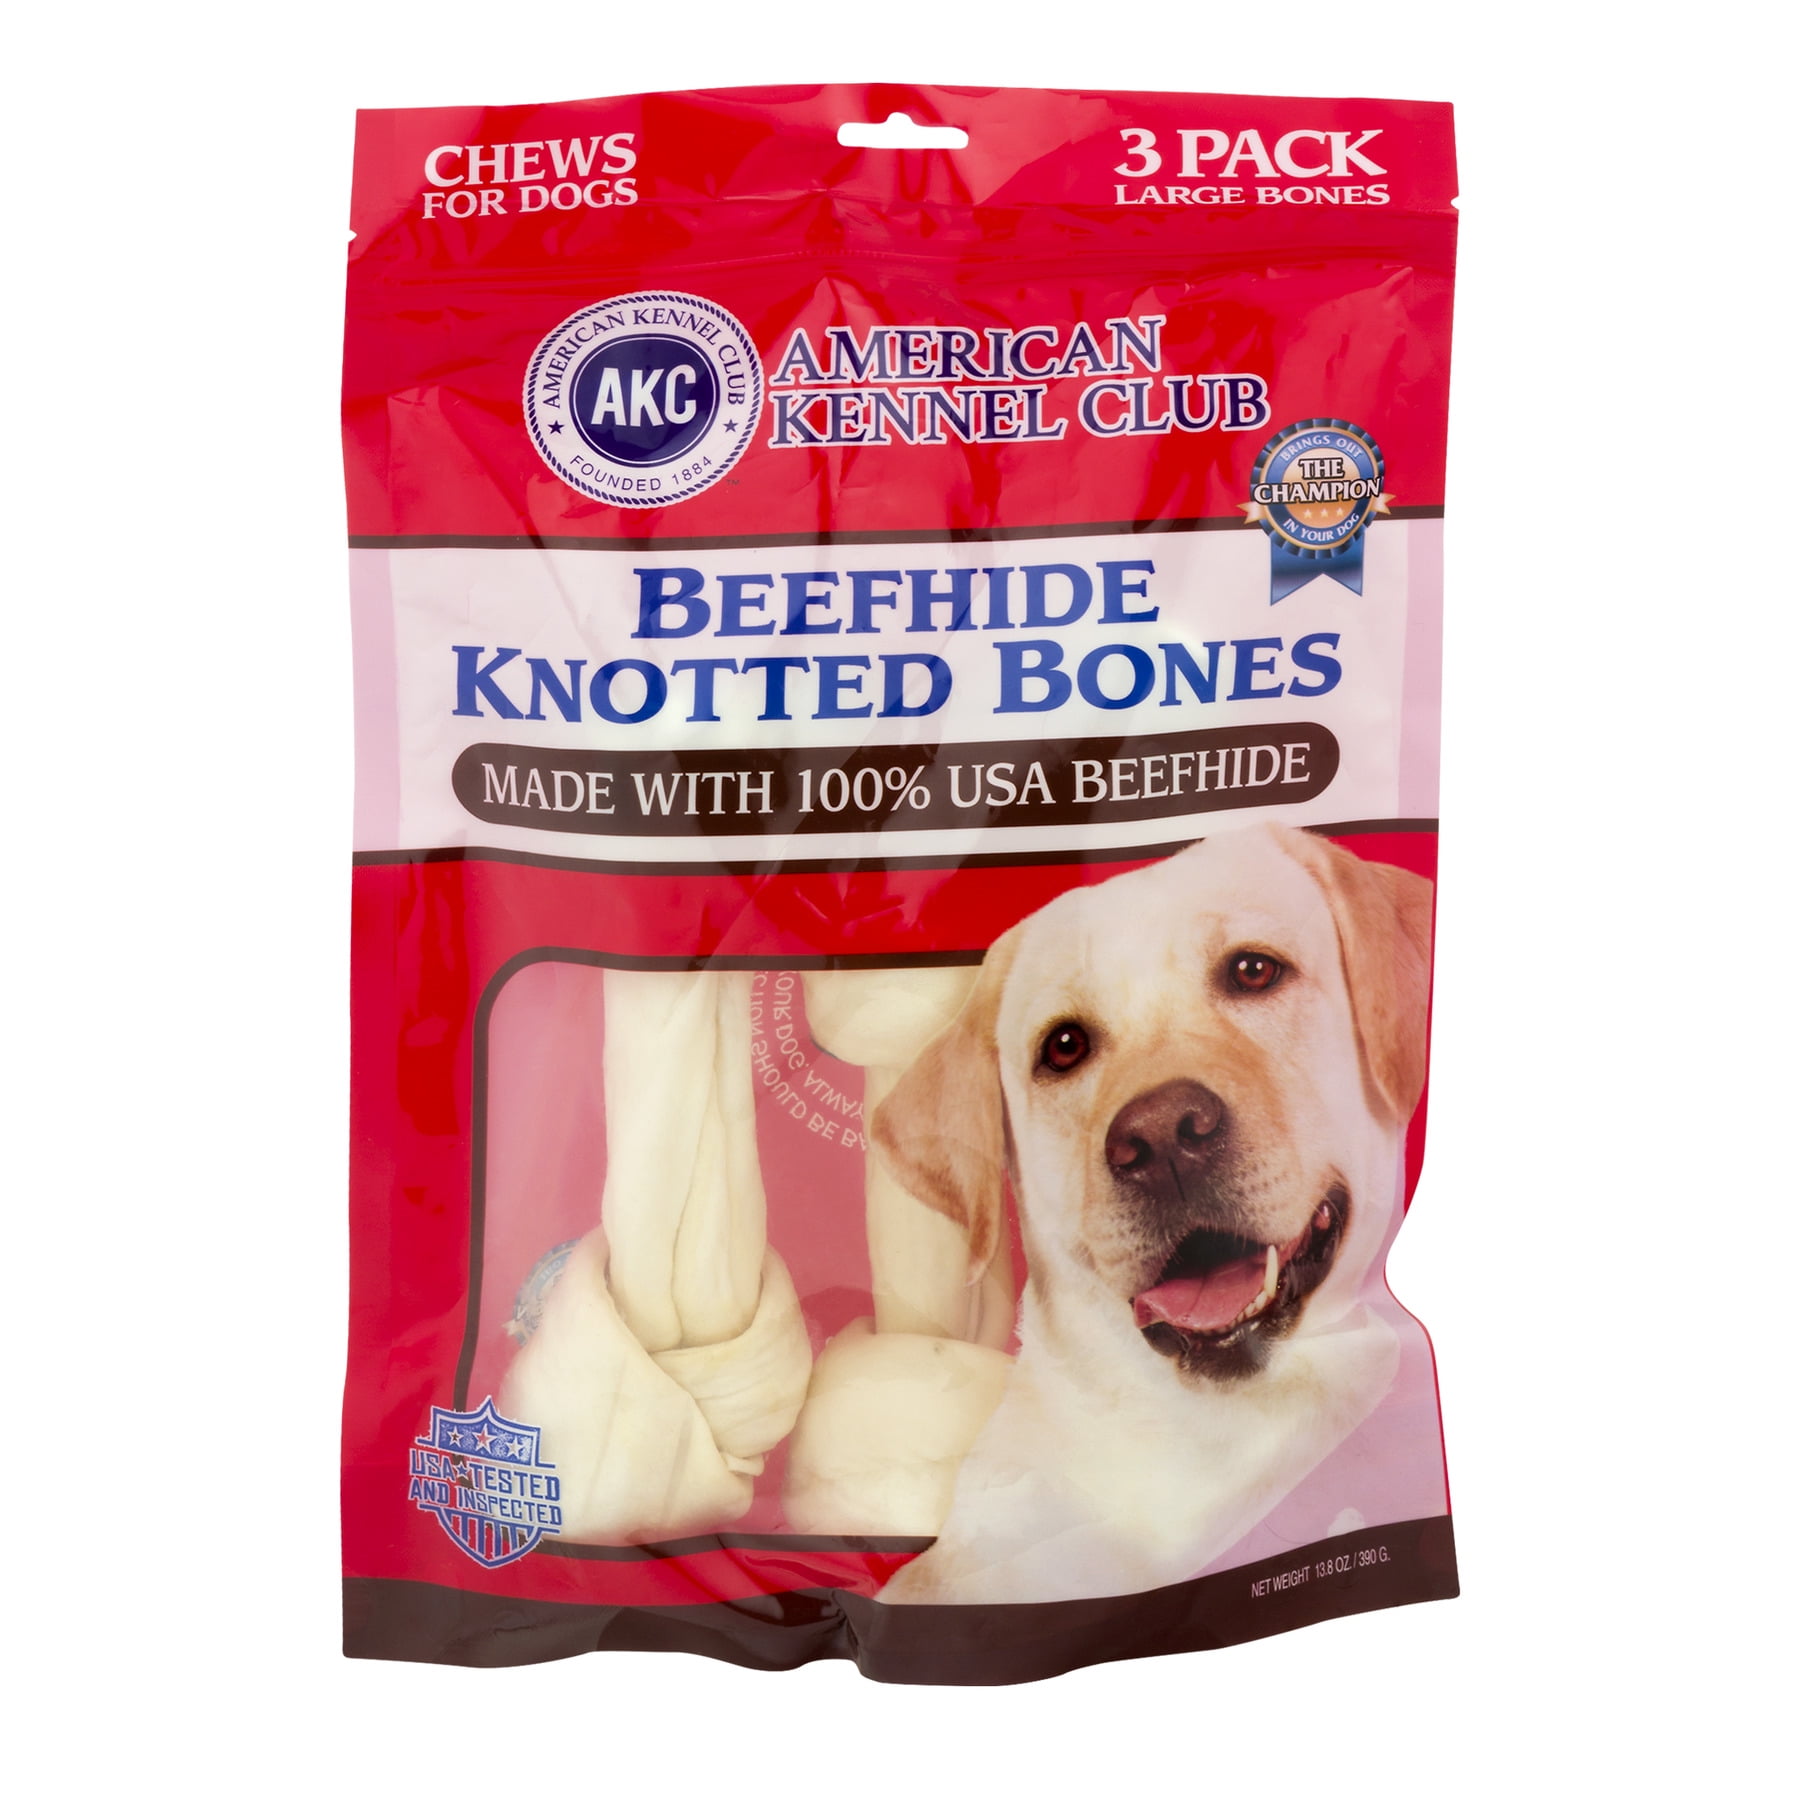 American Kennel Club Beefhide Knotted Bones, 3.0 PACK